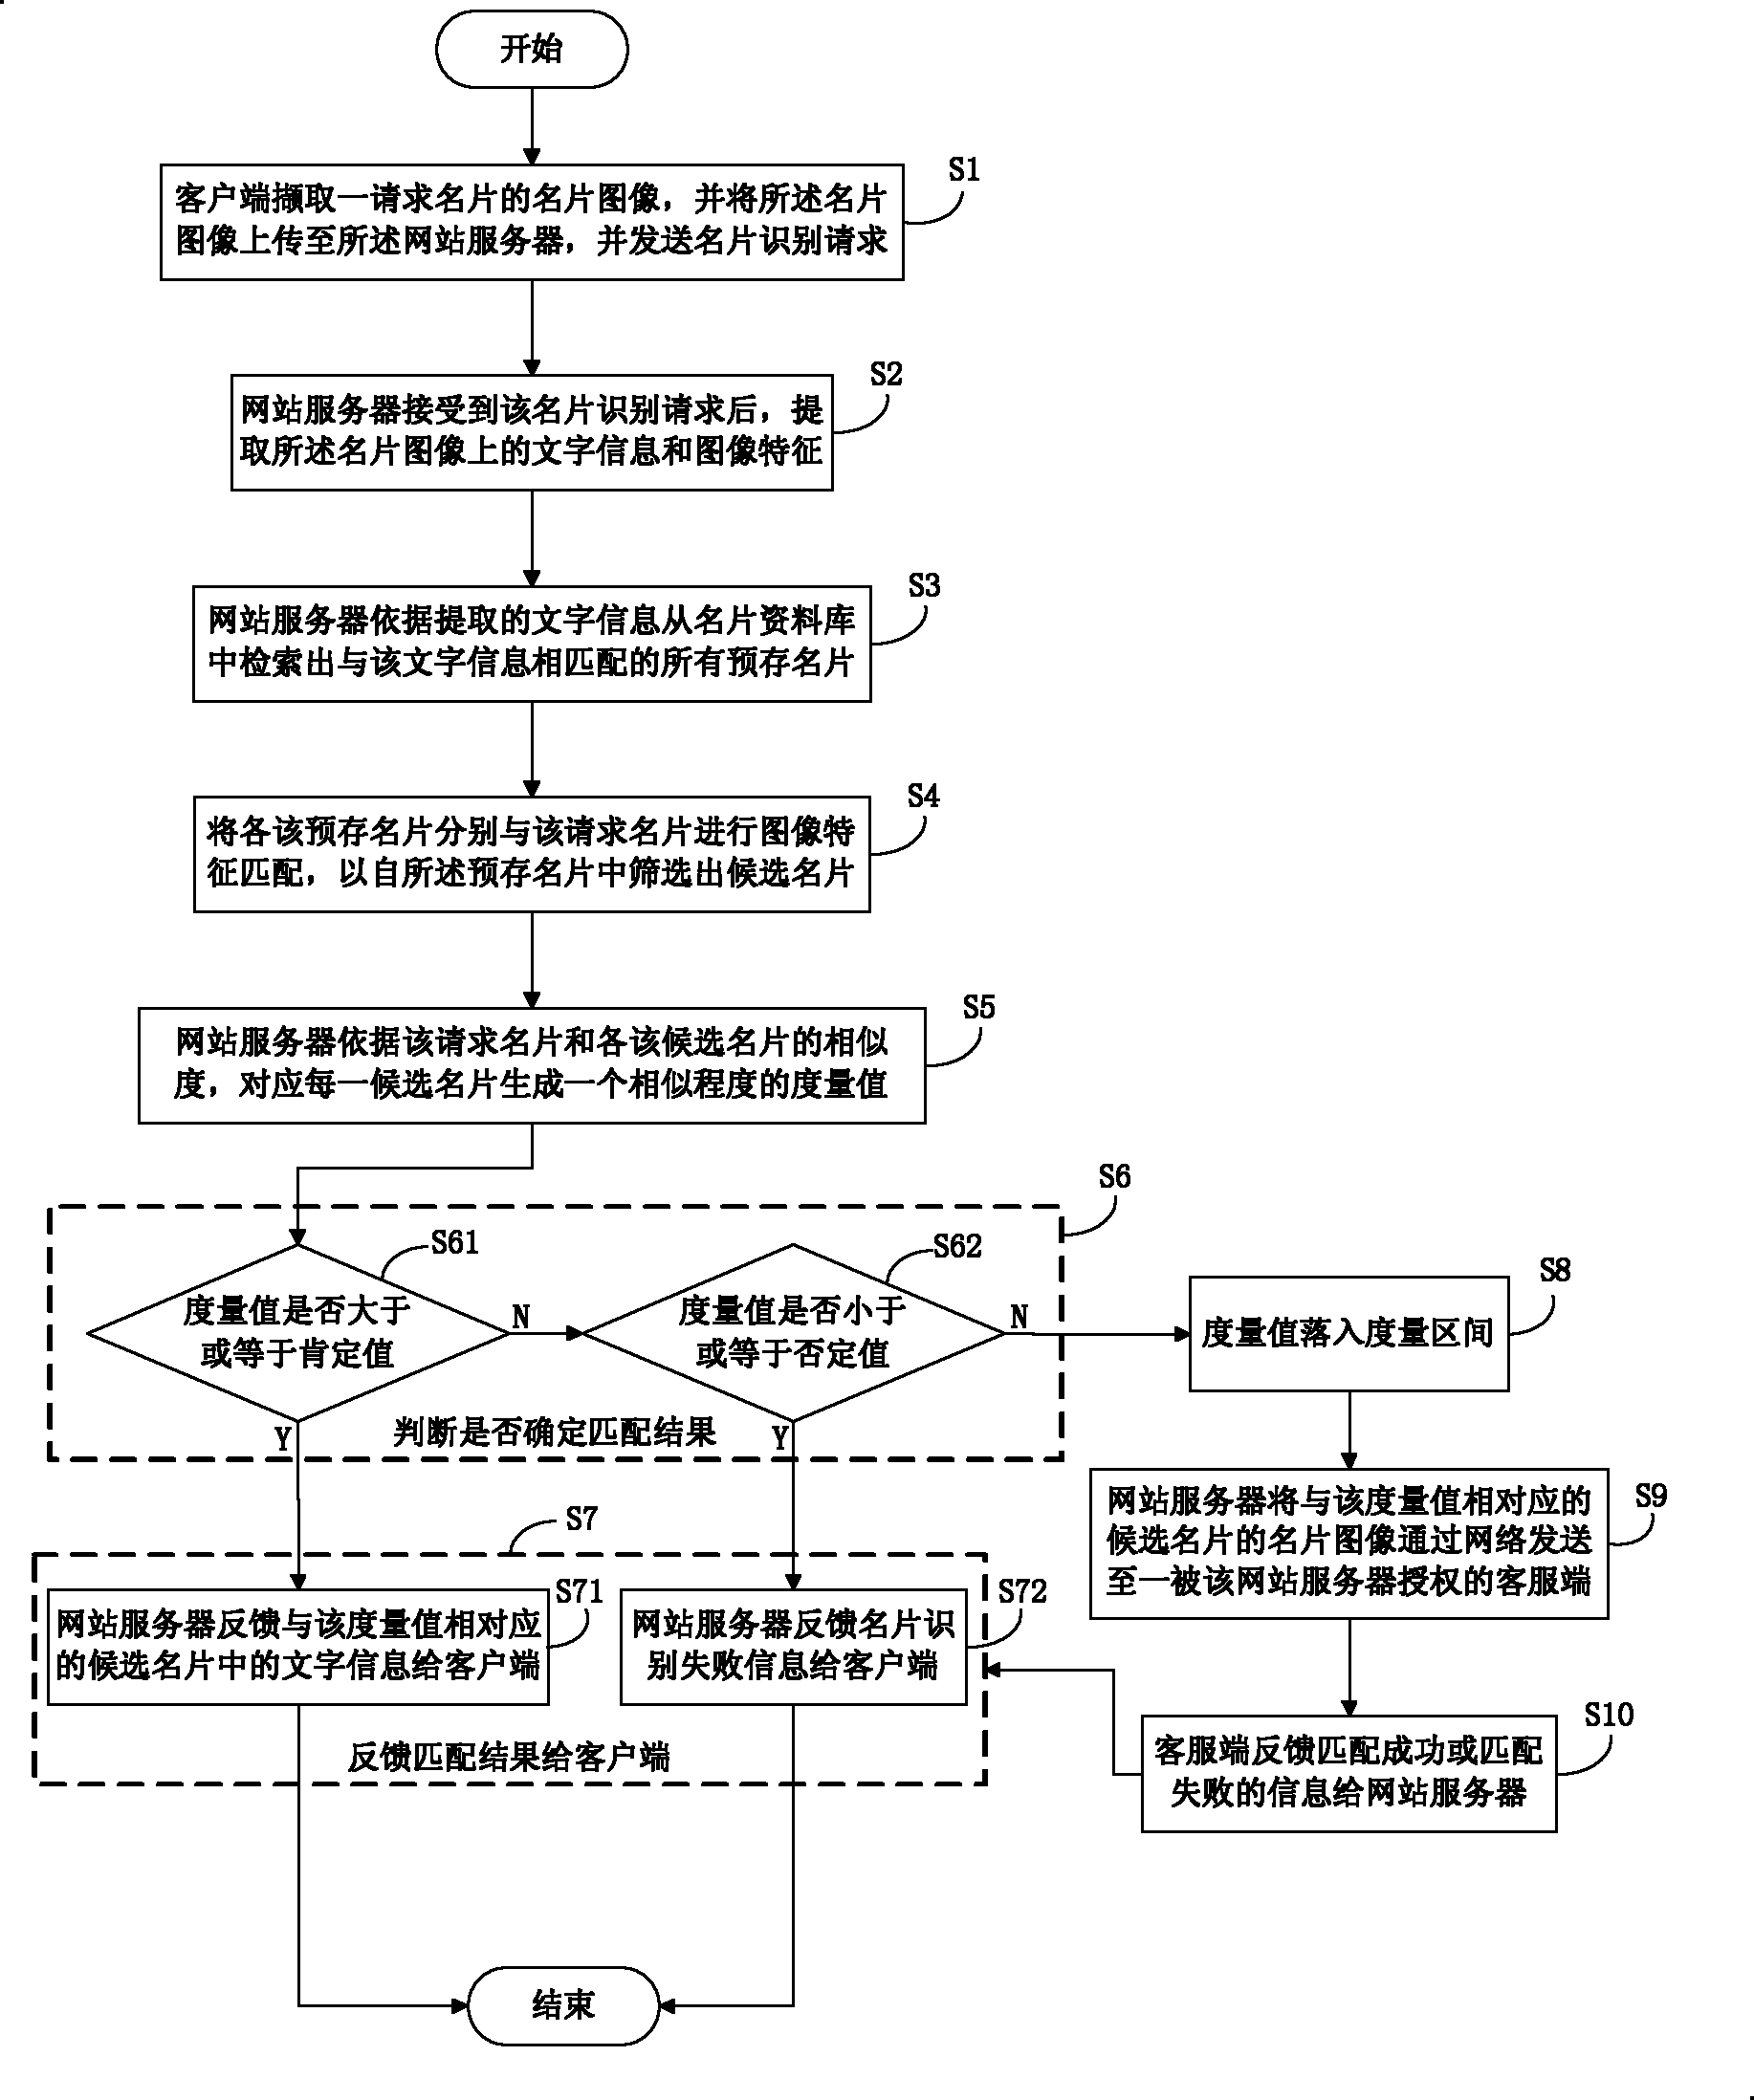 Business card identifying method combining character identification with image matching